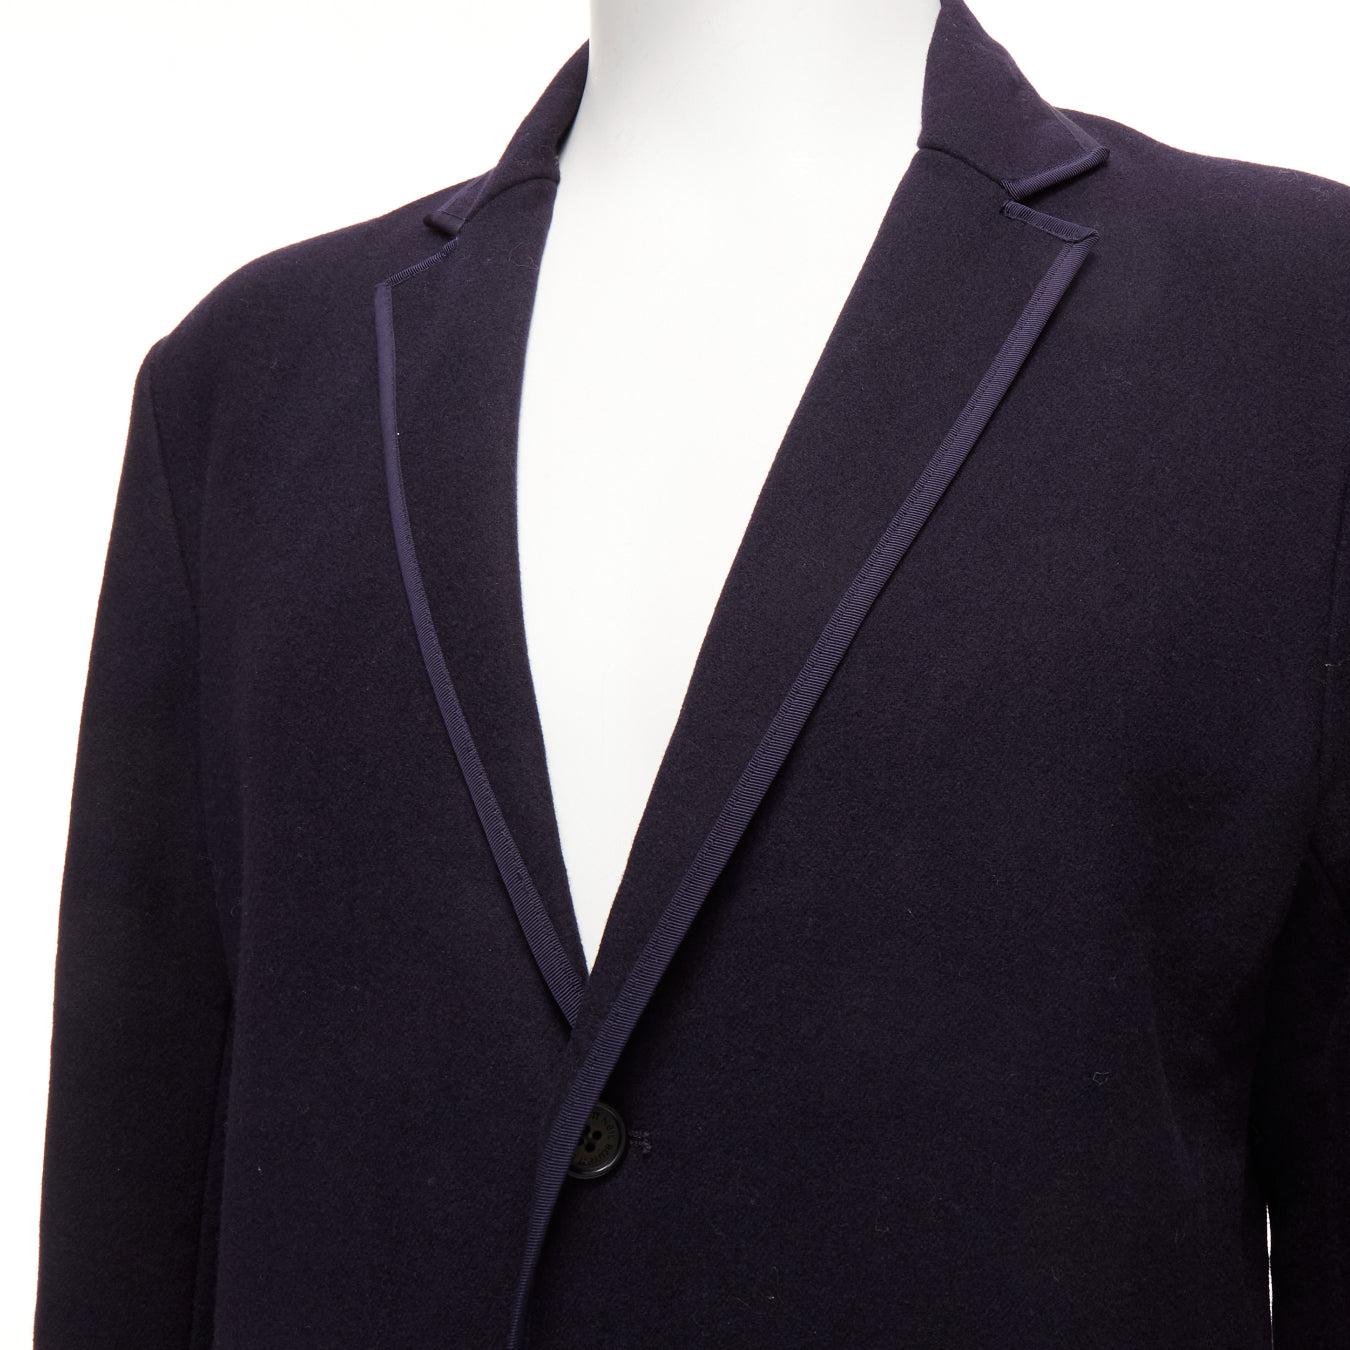 NEIL BARRETT navy wool blend ribbon trimmed pocket detail long coat IT48 M
Reference: JSLE/A00104
Brand: Neil Barrett
Material: Wool, Blend
Color: Navy
Pattern: Solid
Closure: Button
Lining: Navy Fabric
Extra Details: Double pocket detail at right